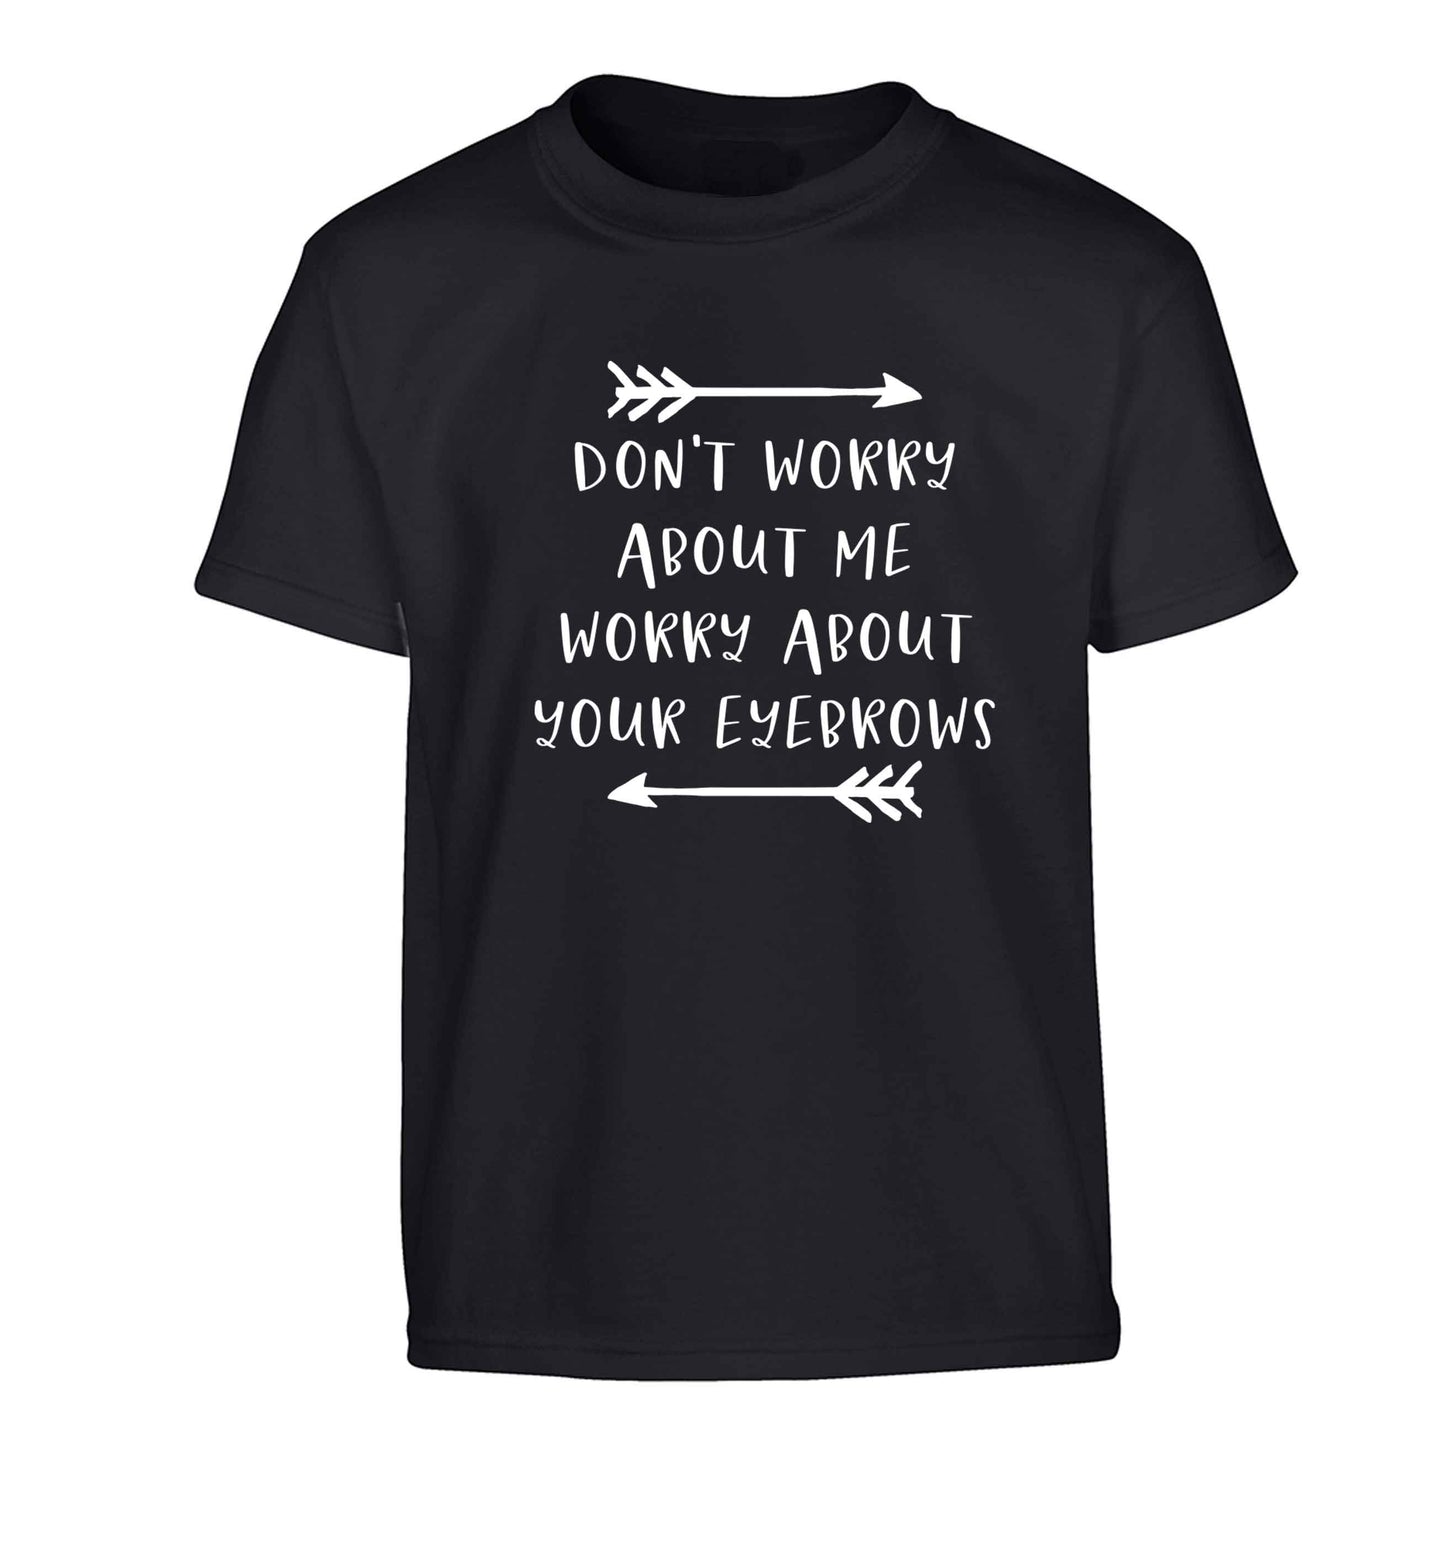 Don't worry about me worry about your eyebrows Children's black Tshirt 12-13 Years